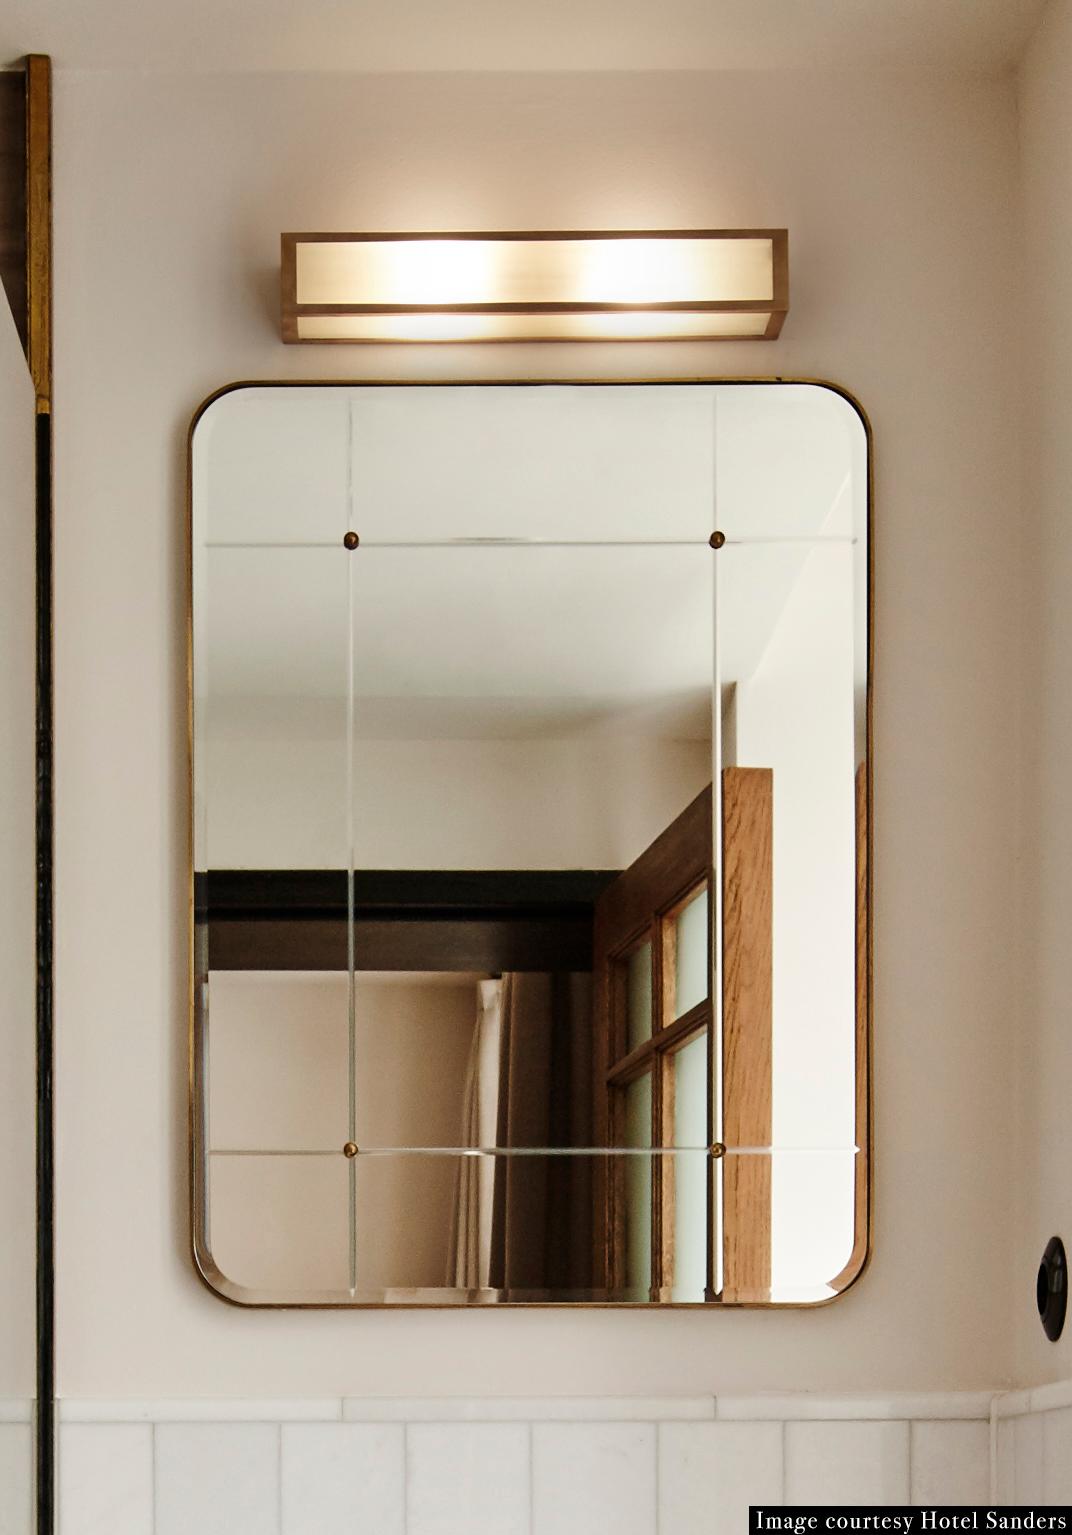 Bathroom mirror for Sanders by Lind + Almond in cut glass and brass, with brass studs. Developed especially for Sanders, Copenhagen's premier luxury boutique hotel.

Available in three sizes.

Bespoke sizes available.